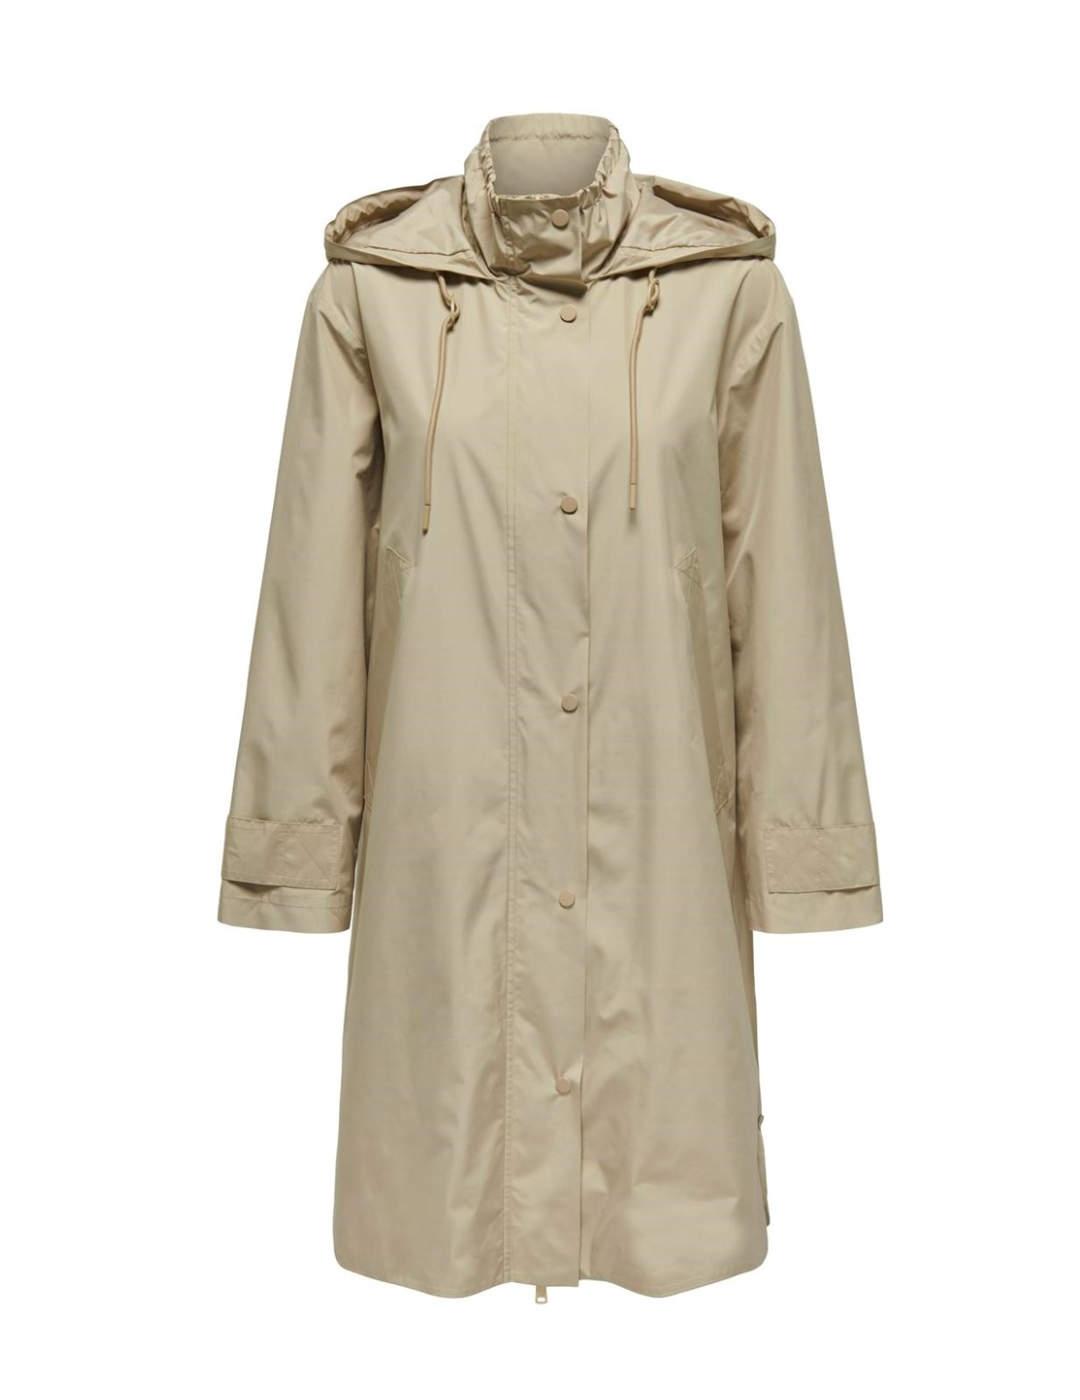 Parka Only Laugusta beige tipo gabardina con capucha mujer